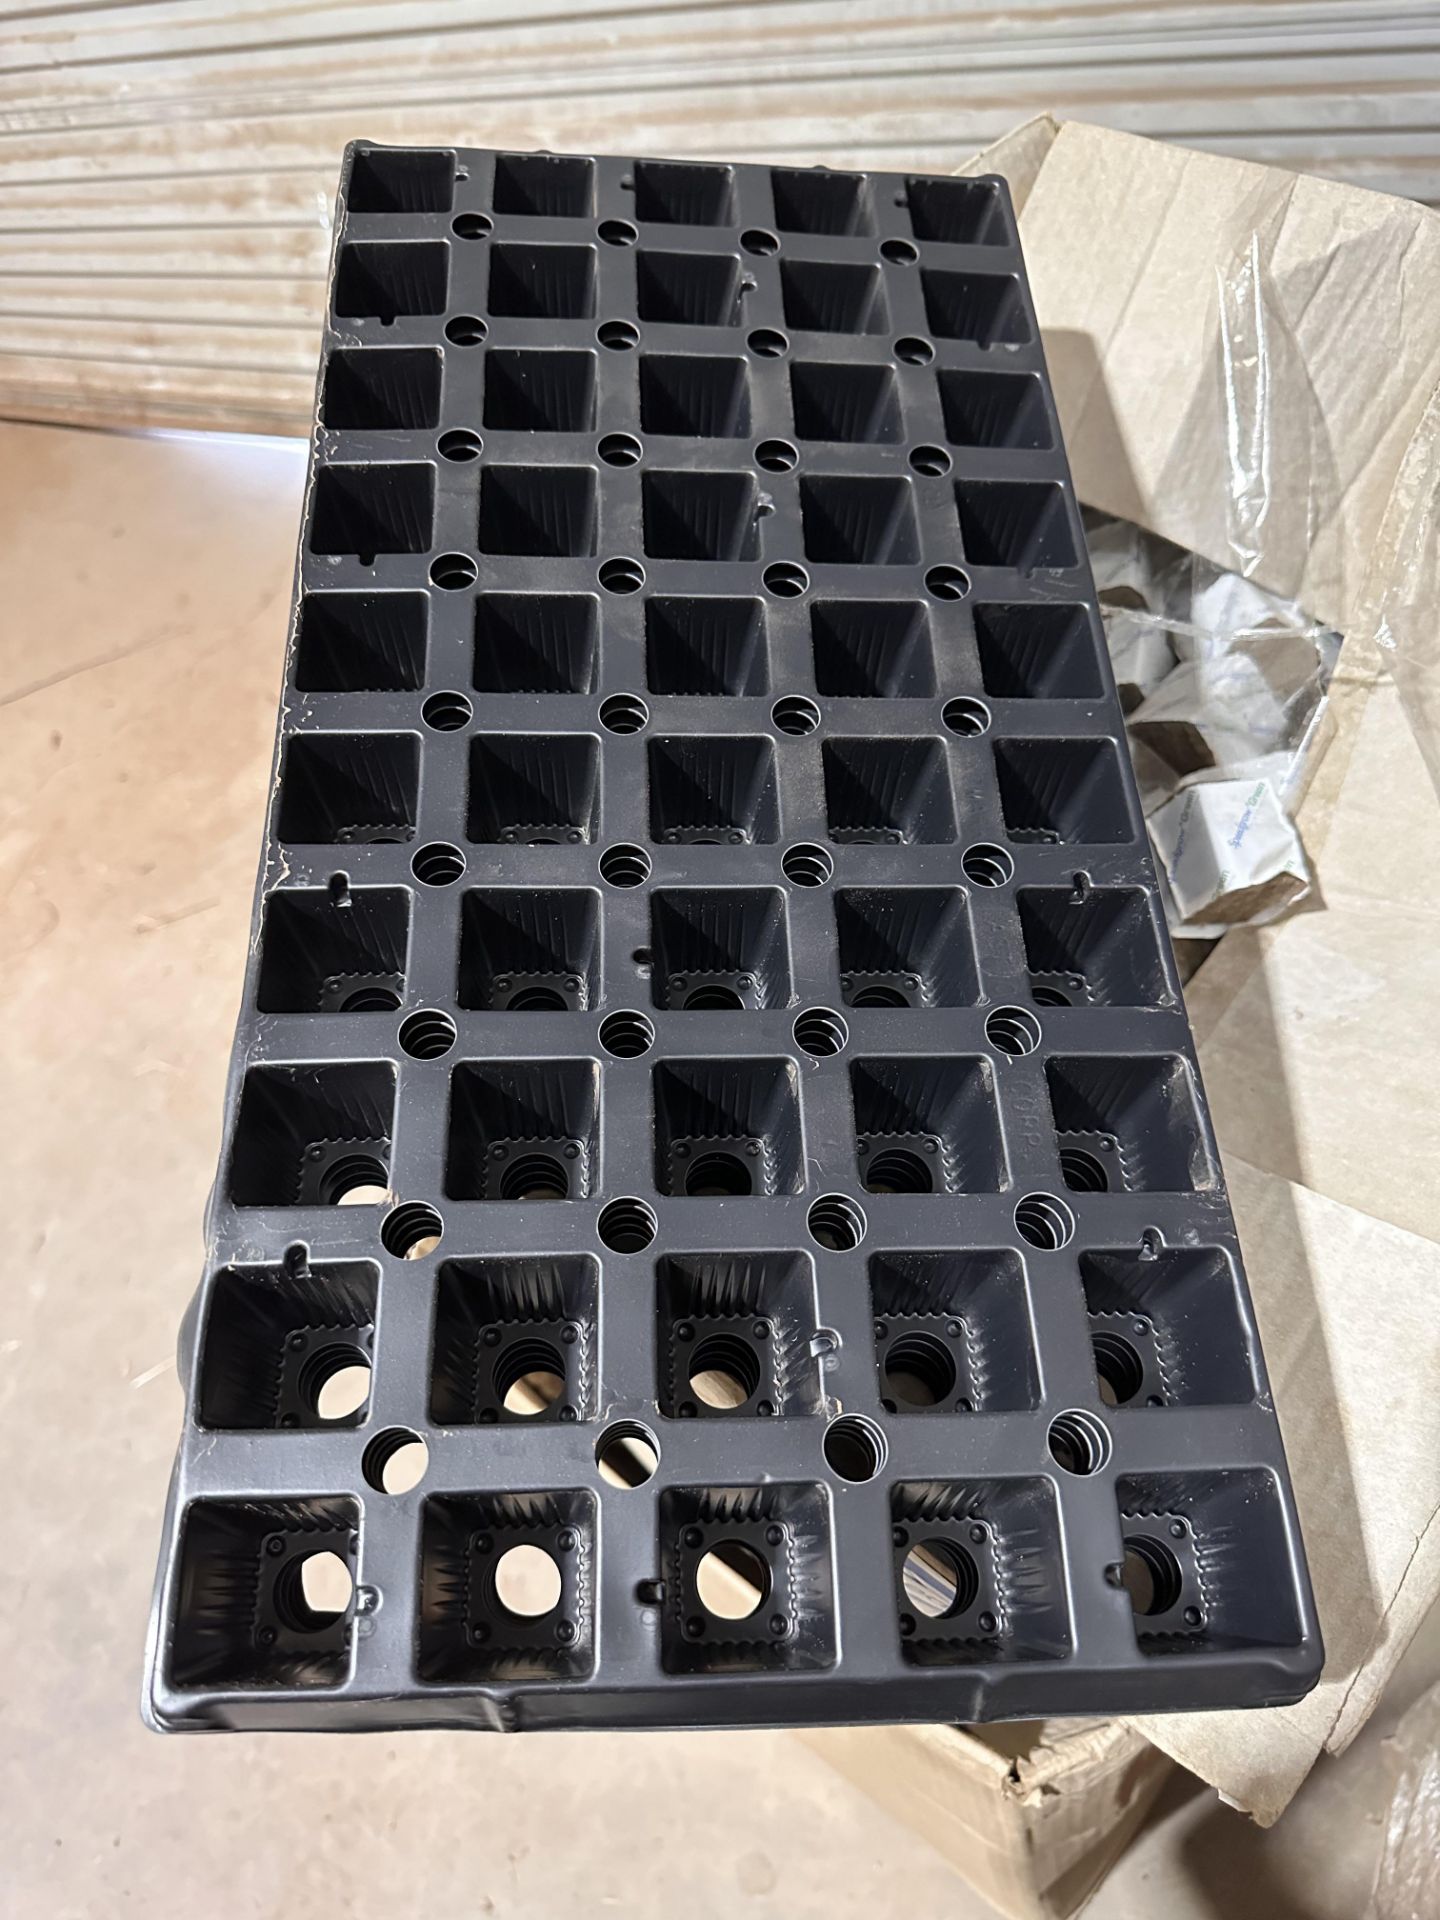 (Located in Snowflake, AZ) Black Planting Trays (1 Pallet) - Image 3 of 5